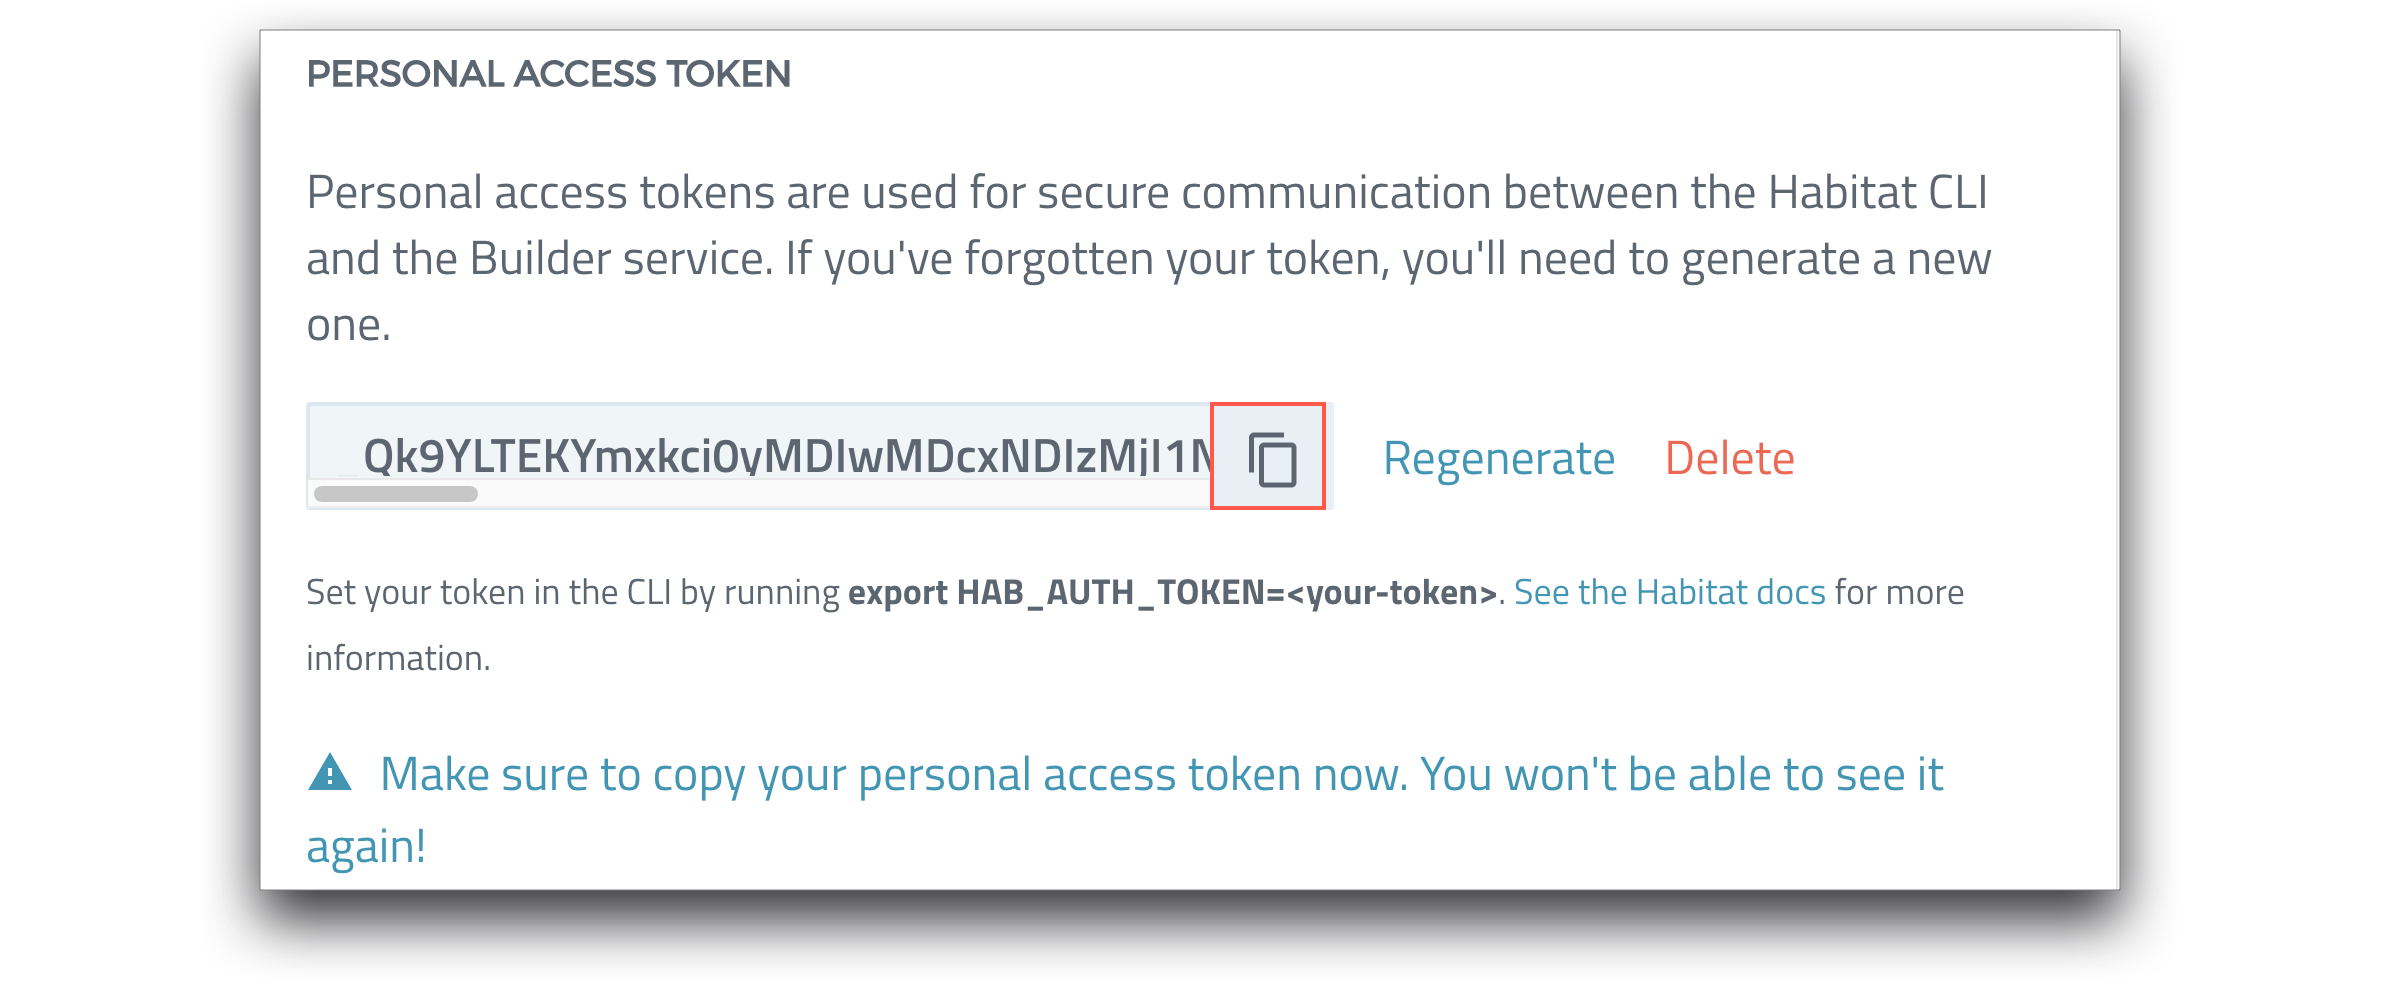 Copy your personal access token